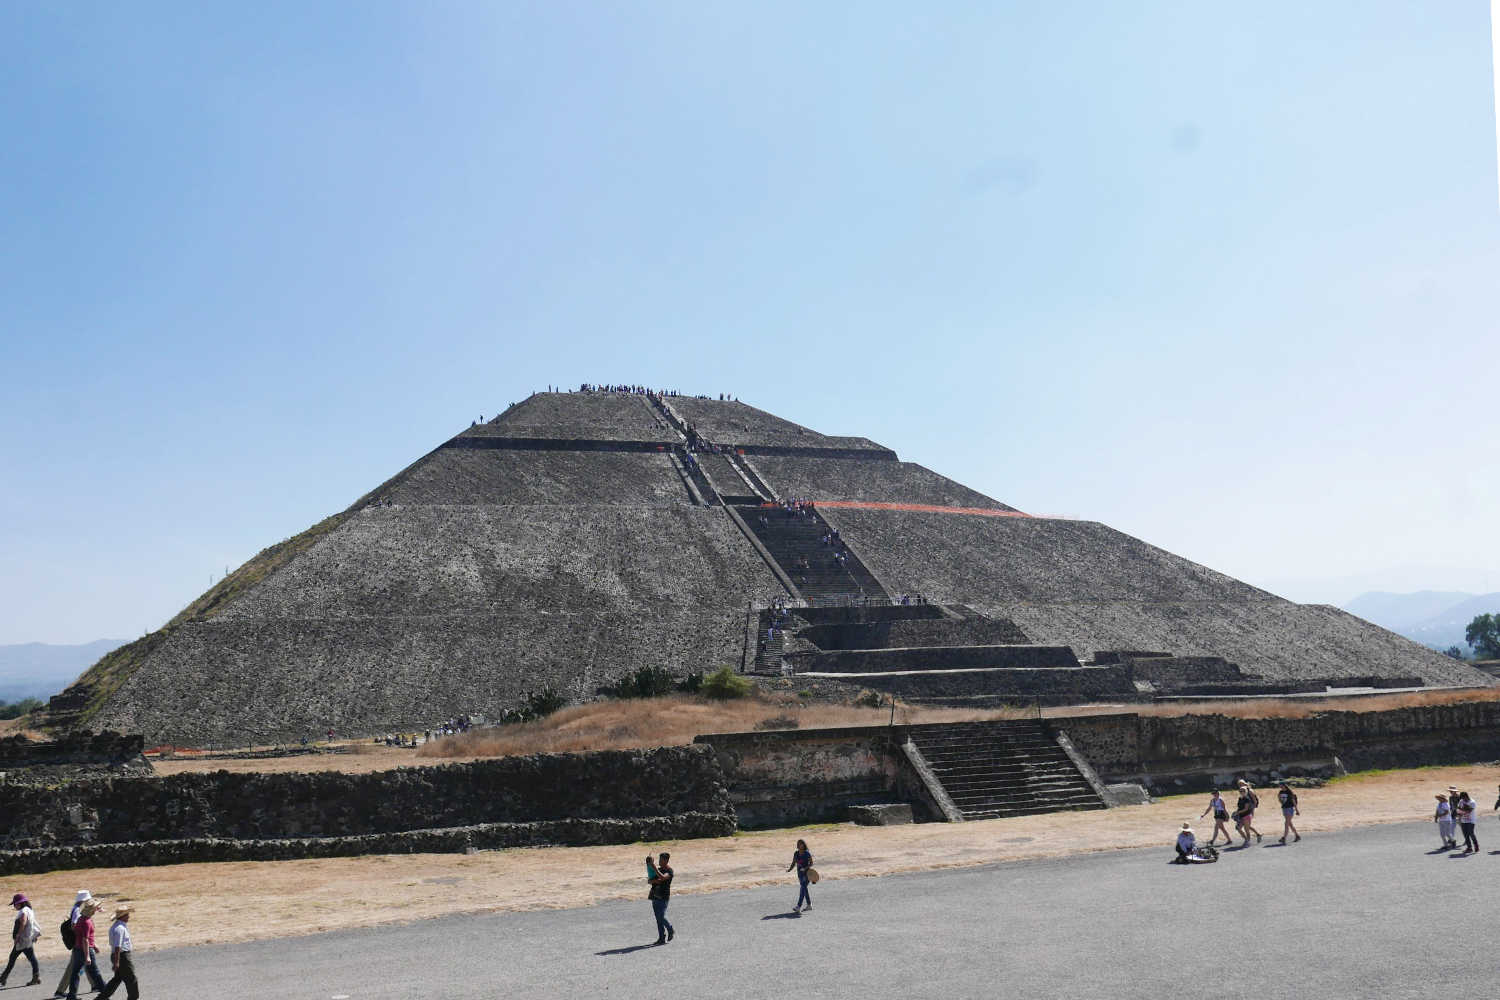 Overview of Pyramid of the Sun in Teotihuacan from Avenue of the Dead